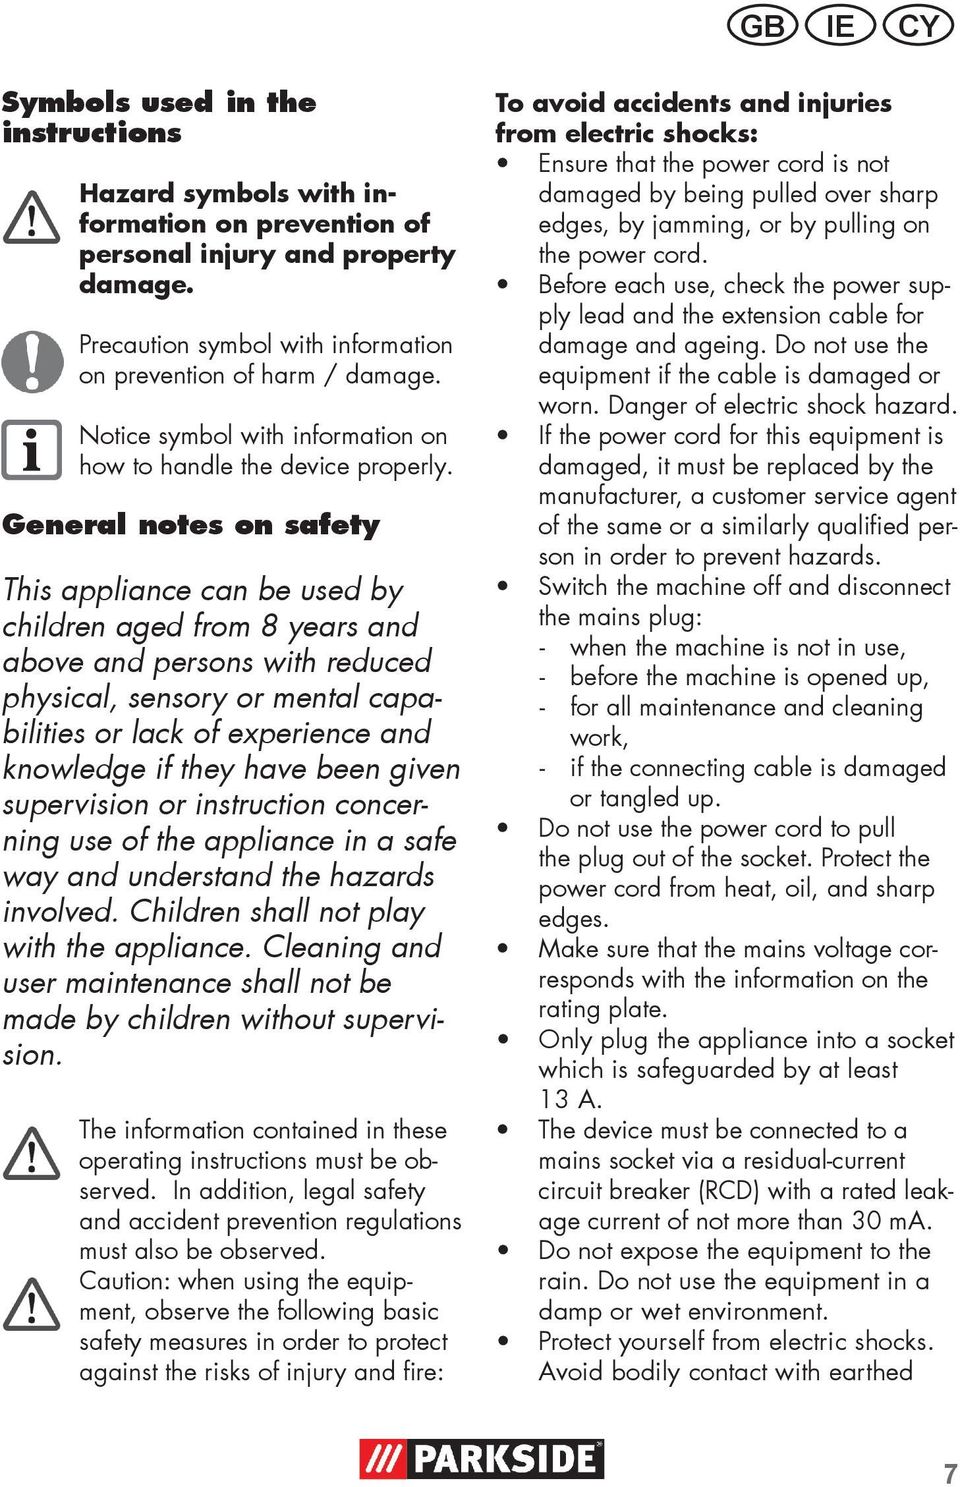 General notes on safety This appliance can be used by children aged from 8 years and above and persons with reduced physical, sensory or mental capabilities or lack of experience and knowledge if